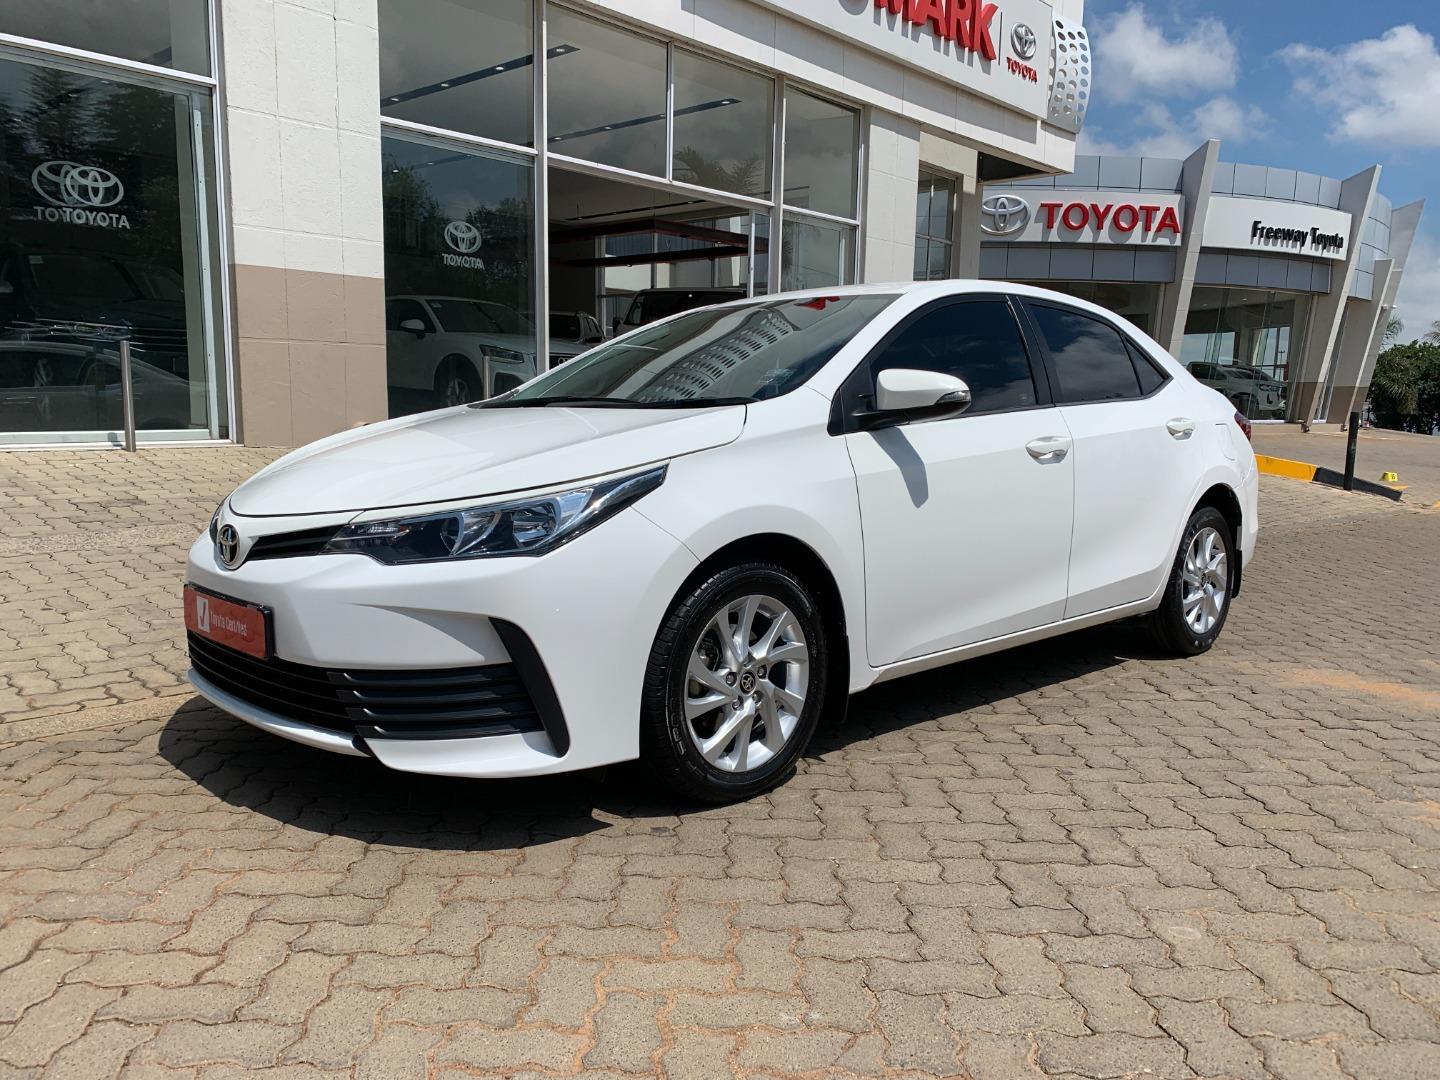 Toyota Corolla Quest MY21.1 2021 for sale in 